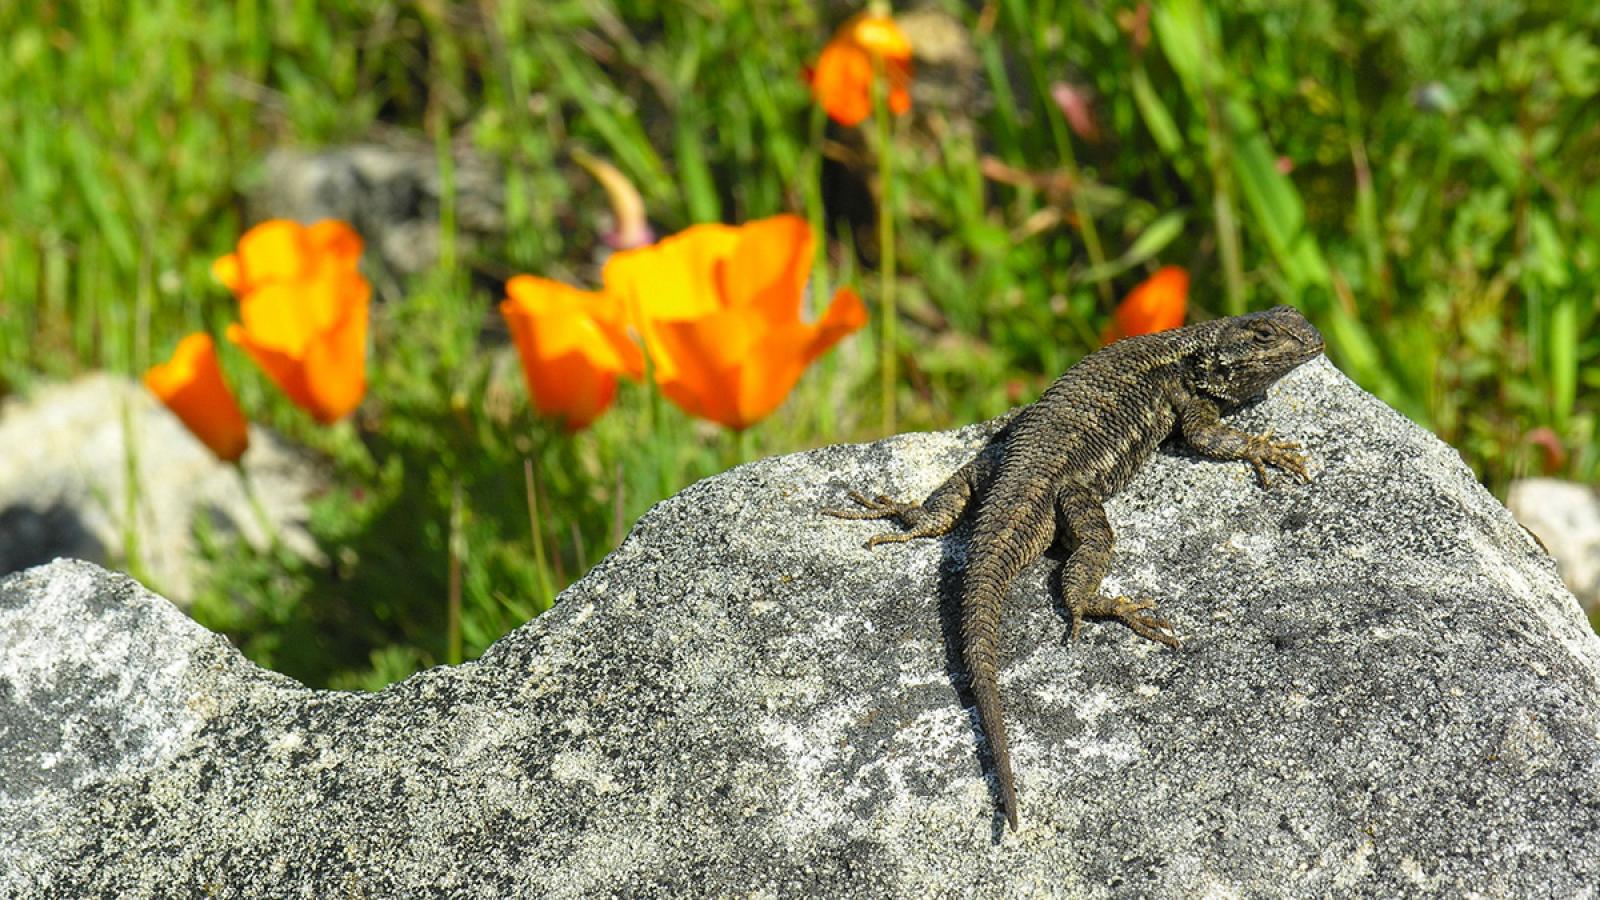 a western fence lizard sitting on a rock with poppies in the background